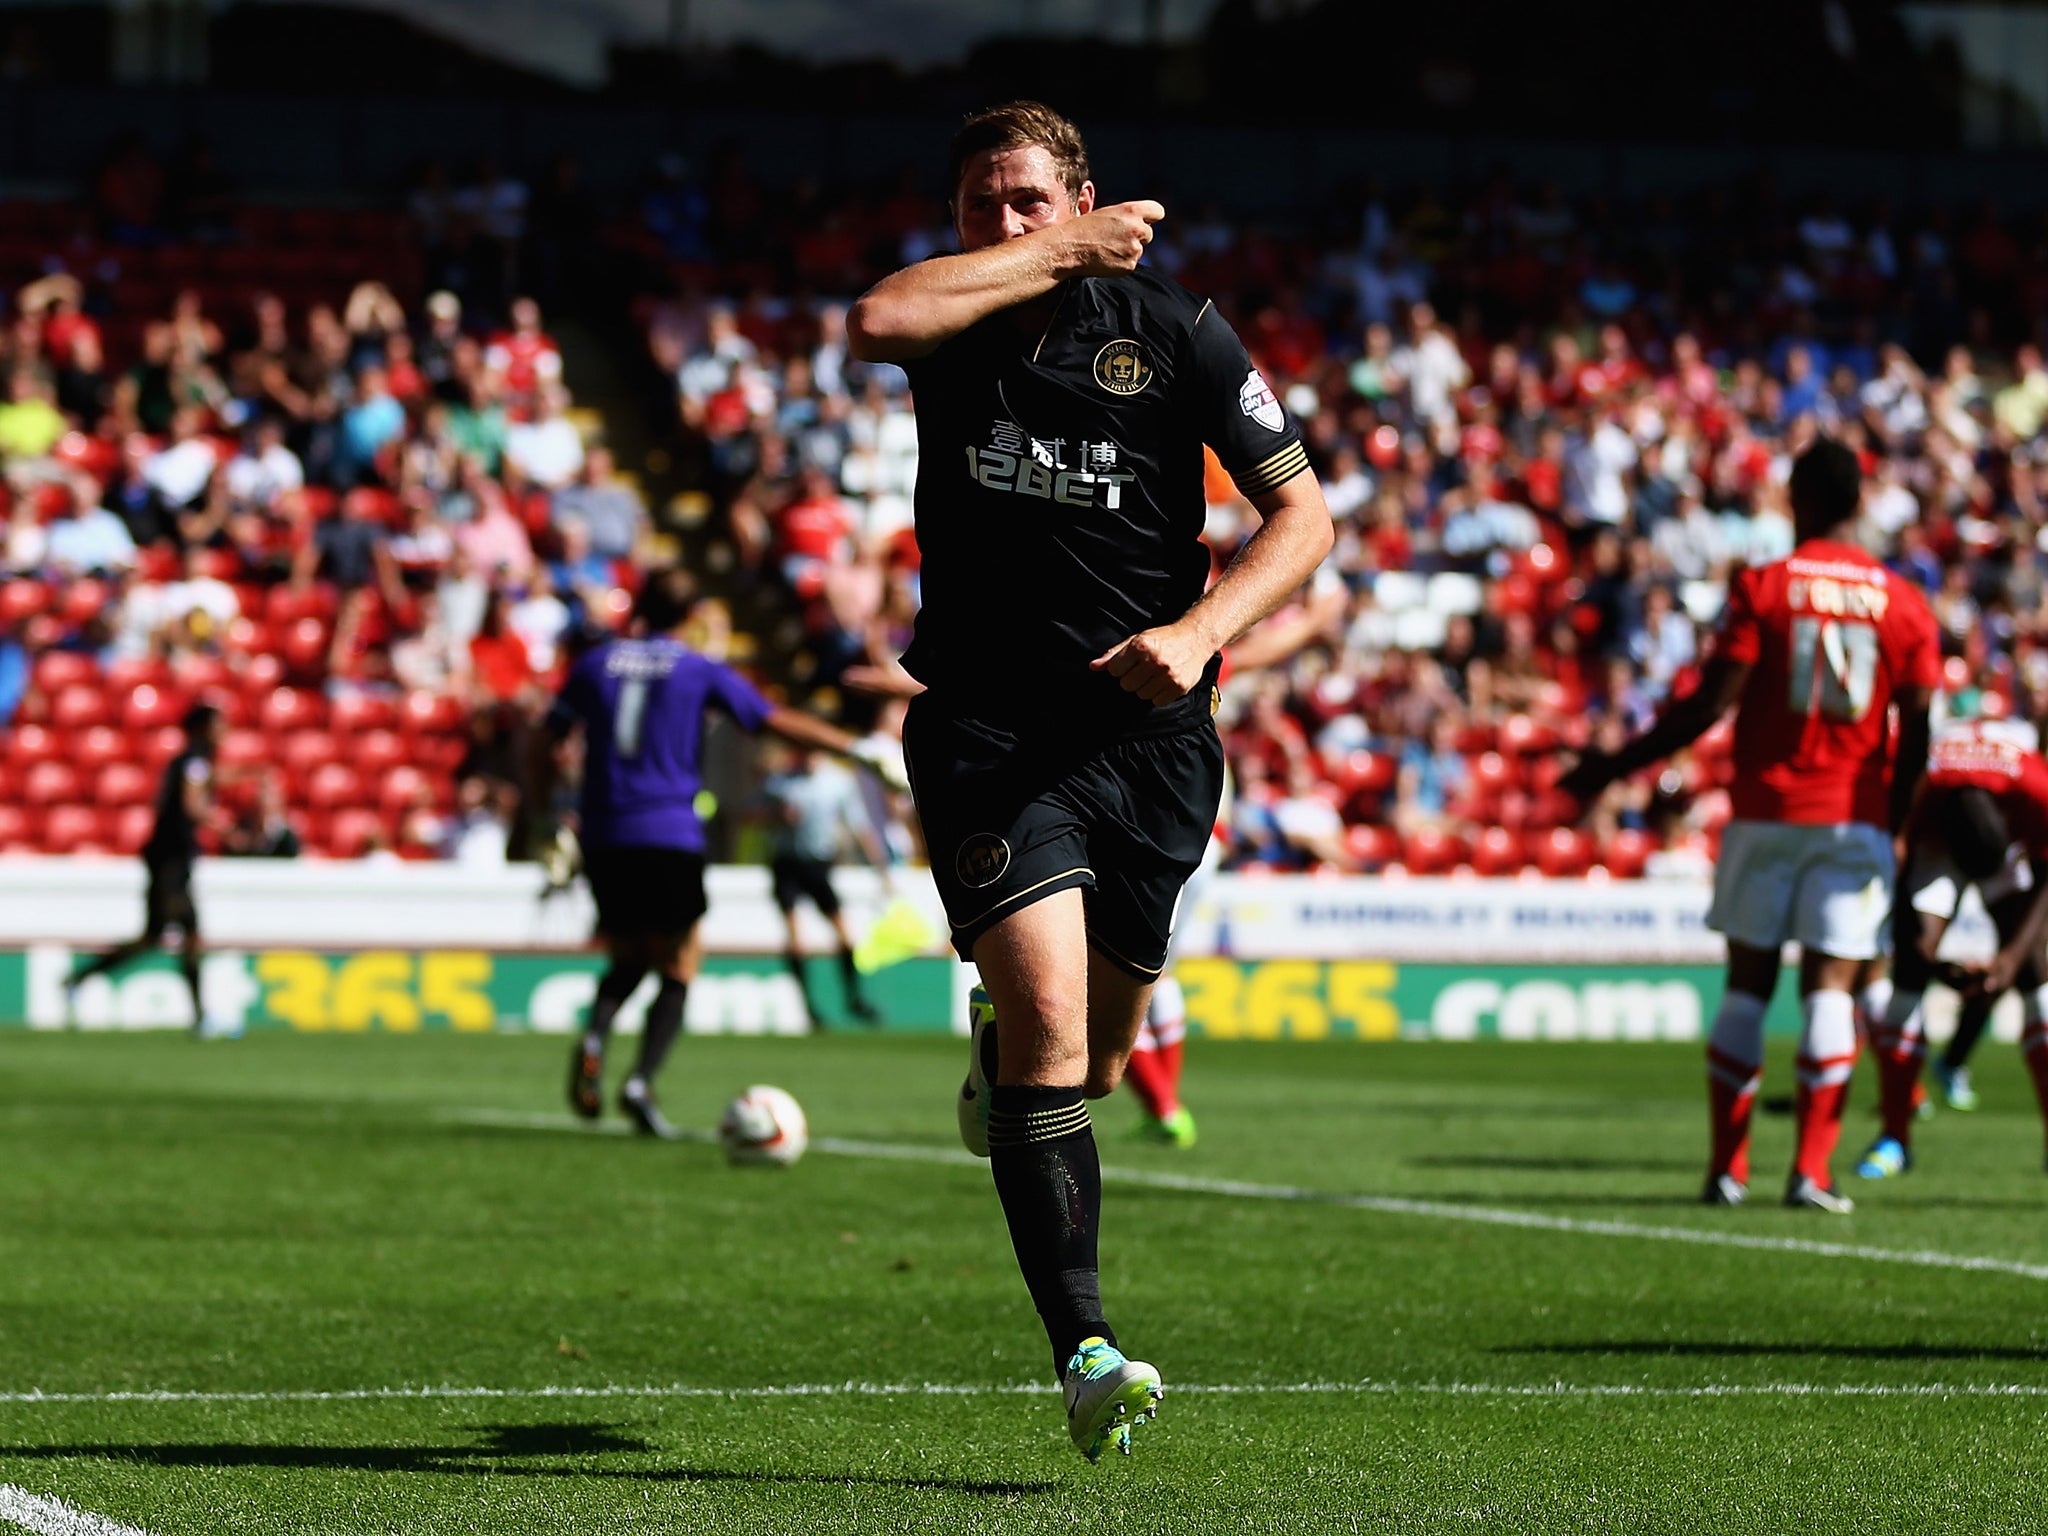 Grant Holt celebrates scoring his first goal for new club Wigan